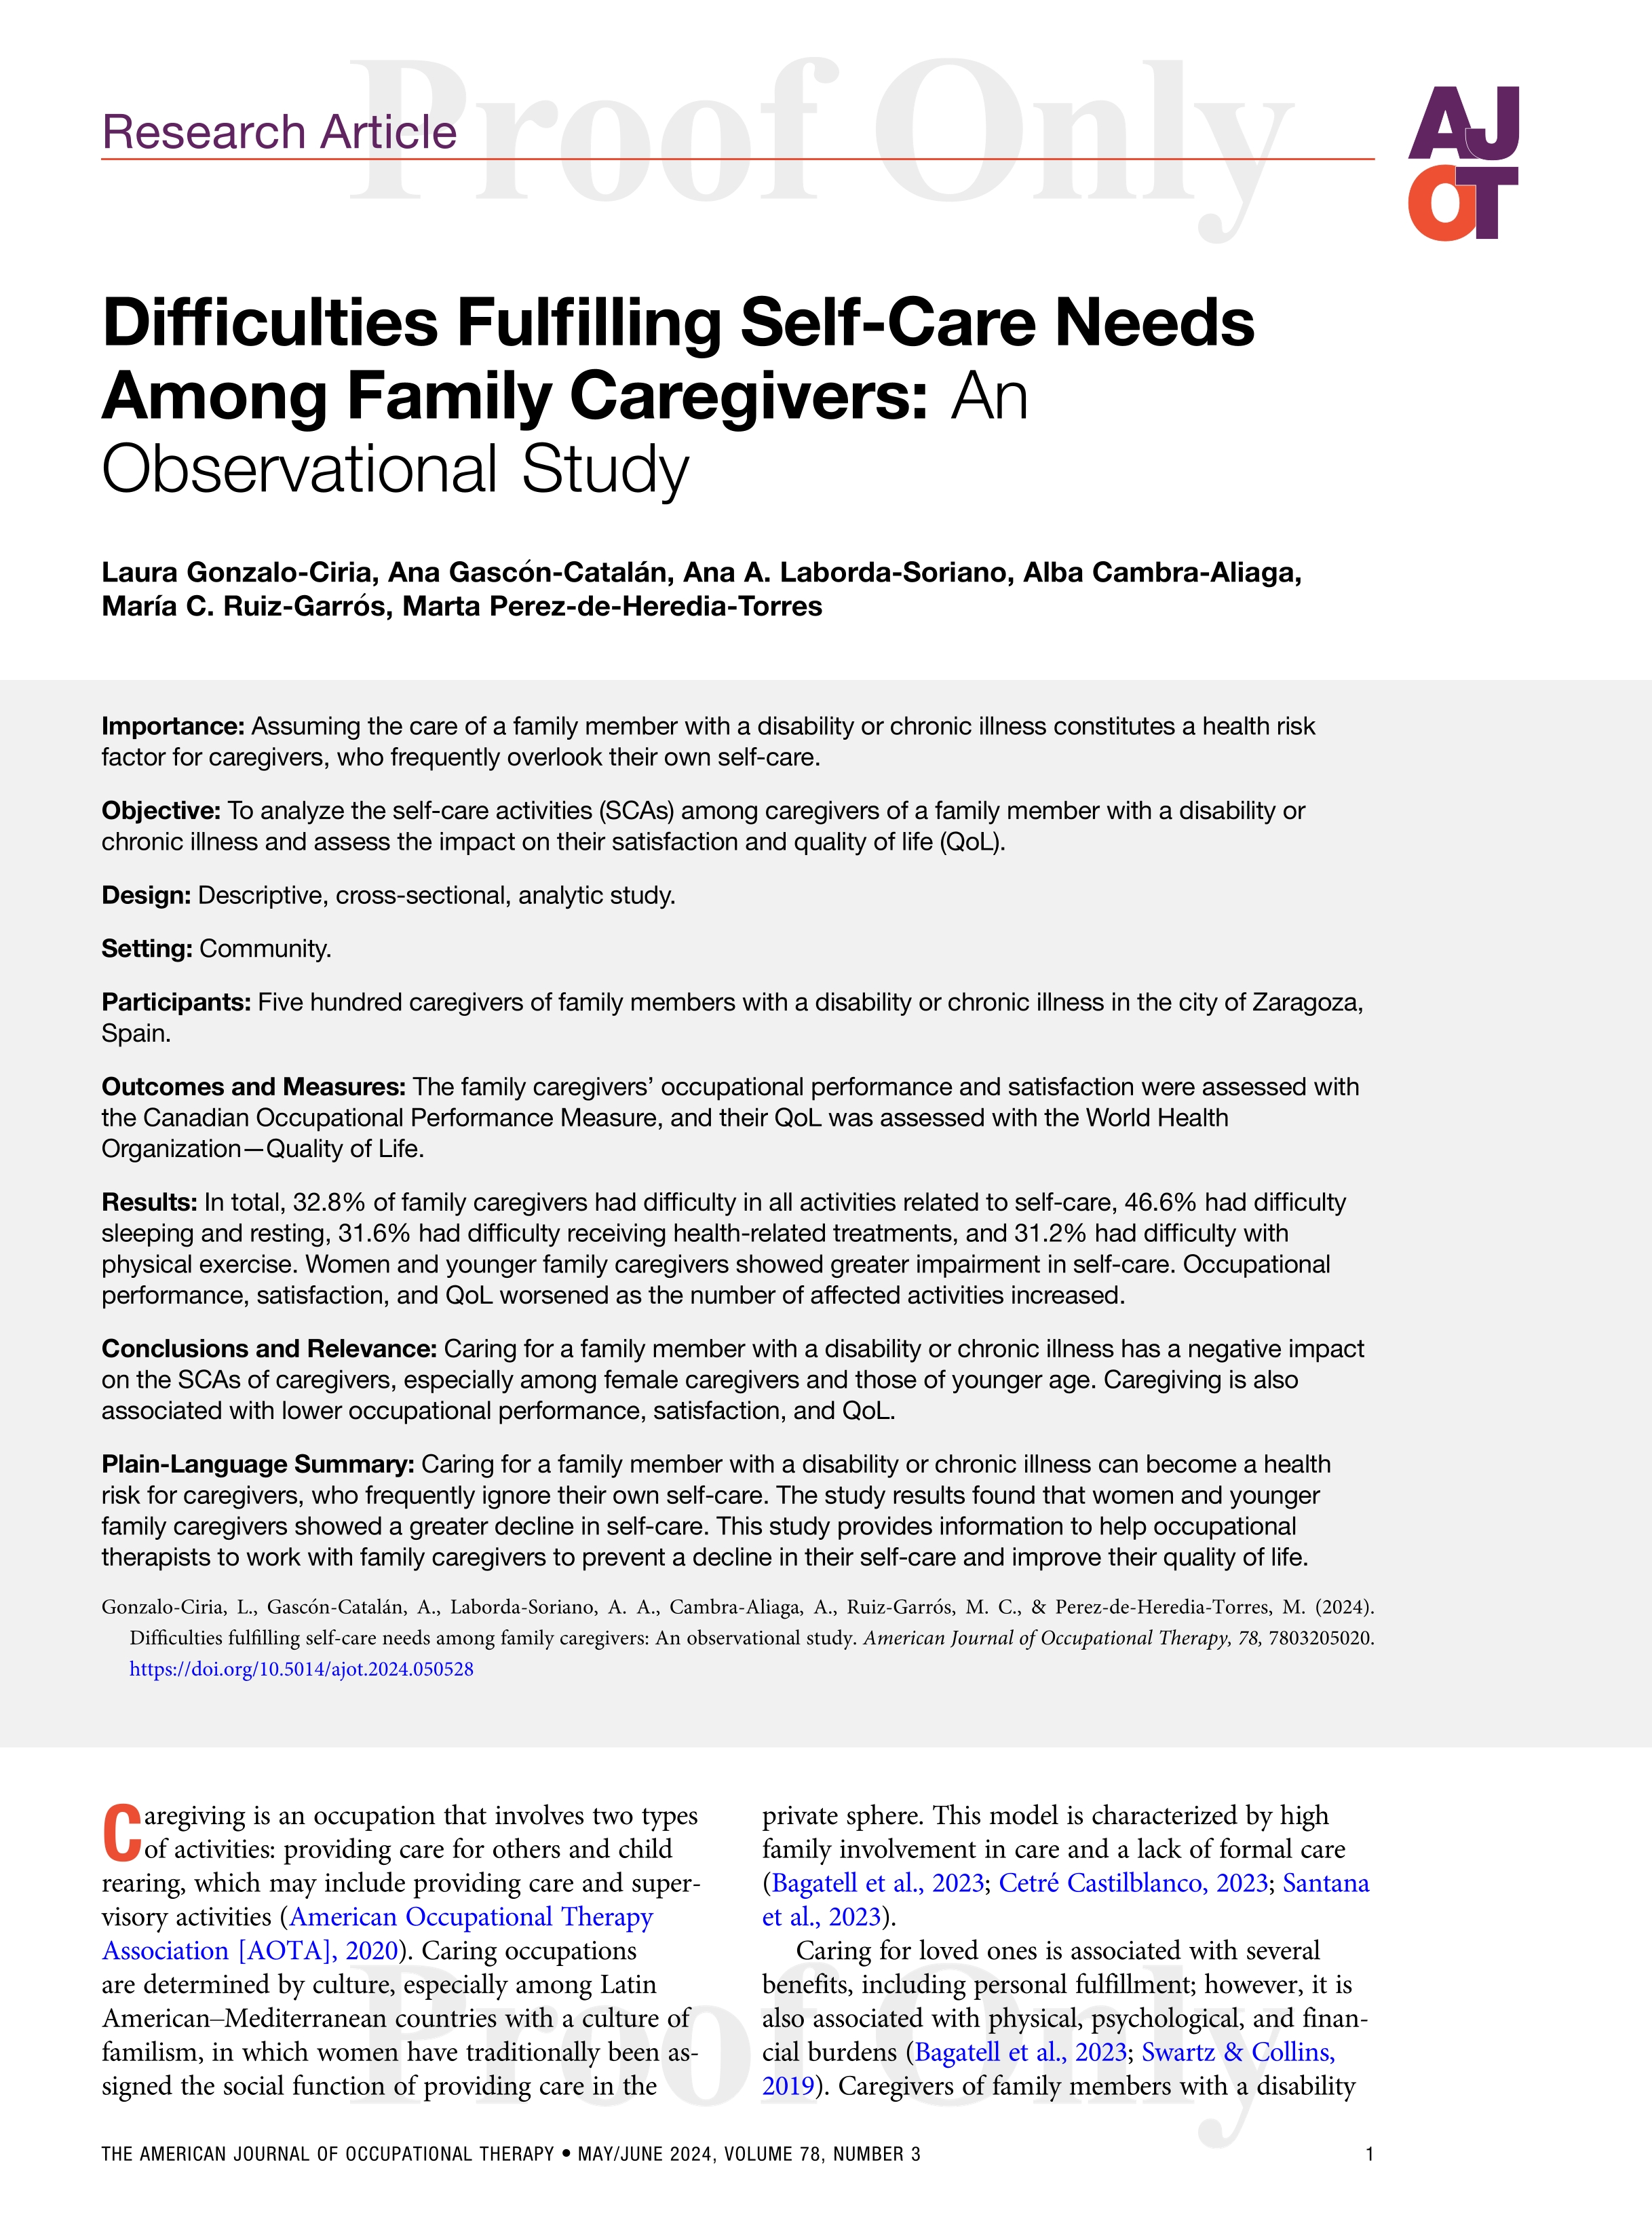 Difficulties Fulfilling Self-Care Needs Among Family Caregivers: An Observational Study